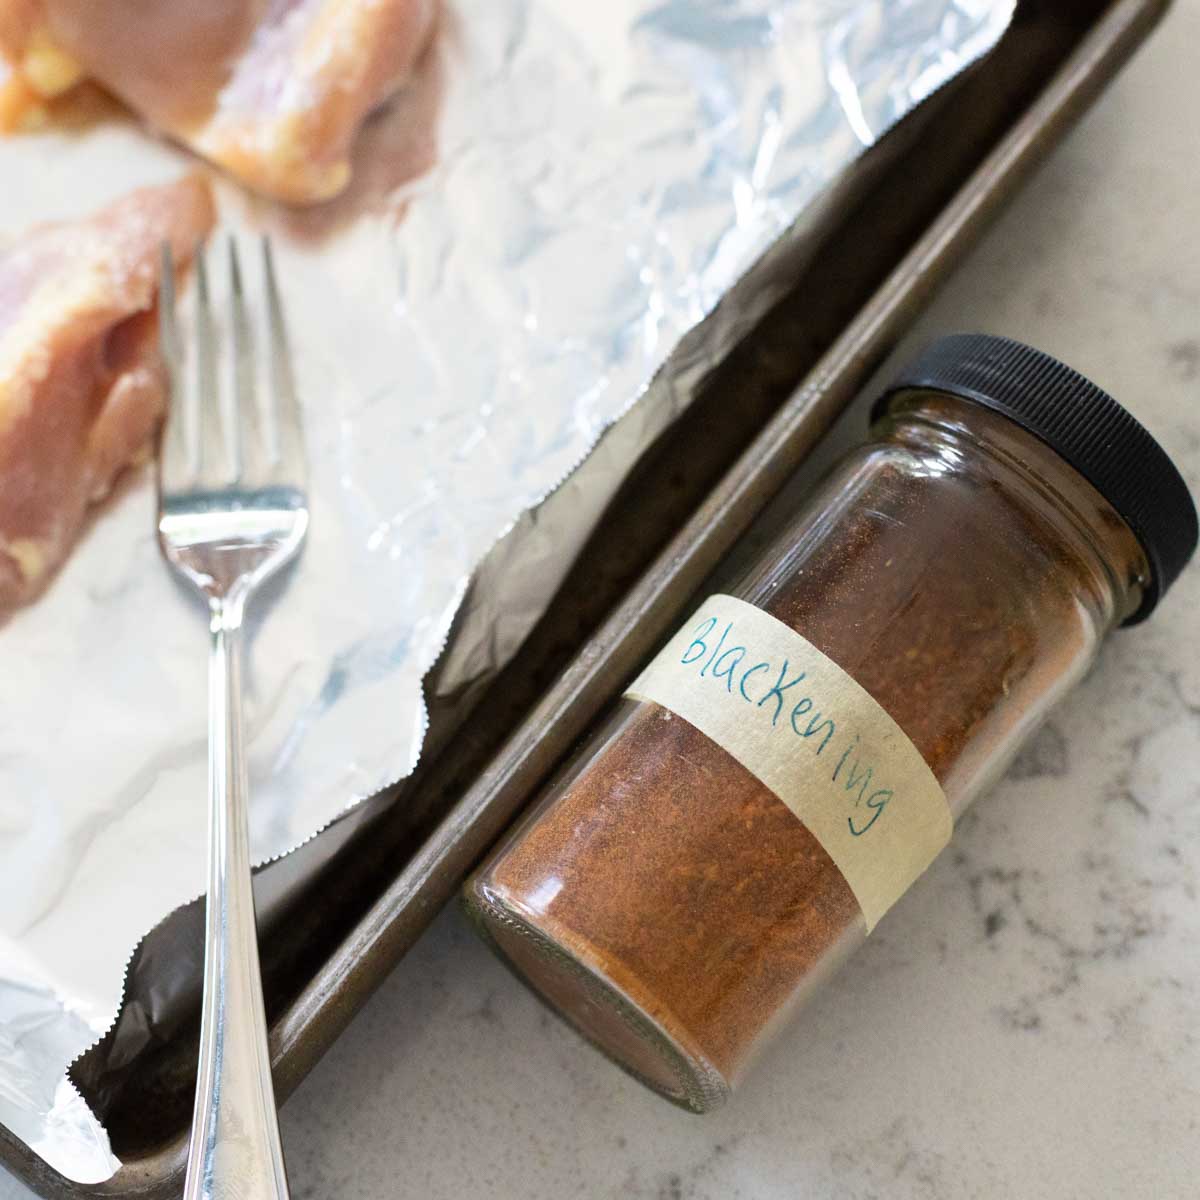 A jar of homemade blackening seasoning lays on the counter next to a baking pan with chicken.